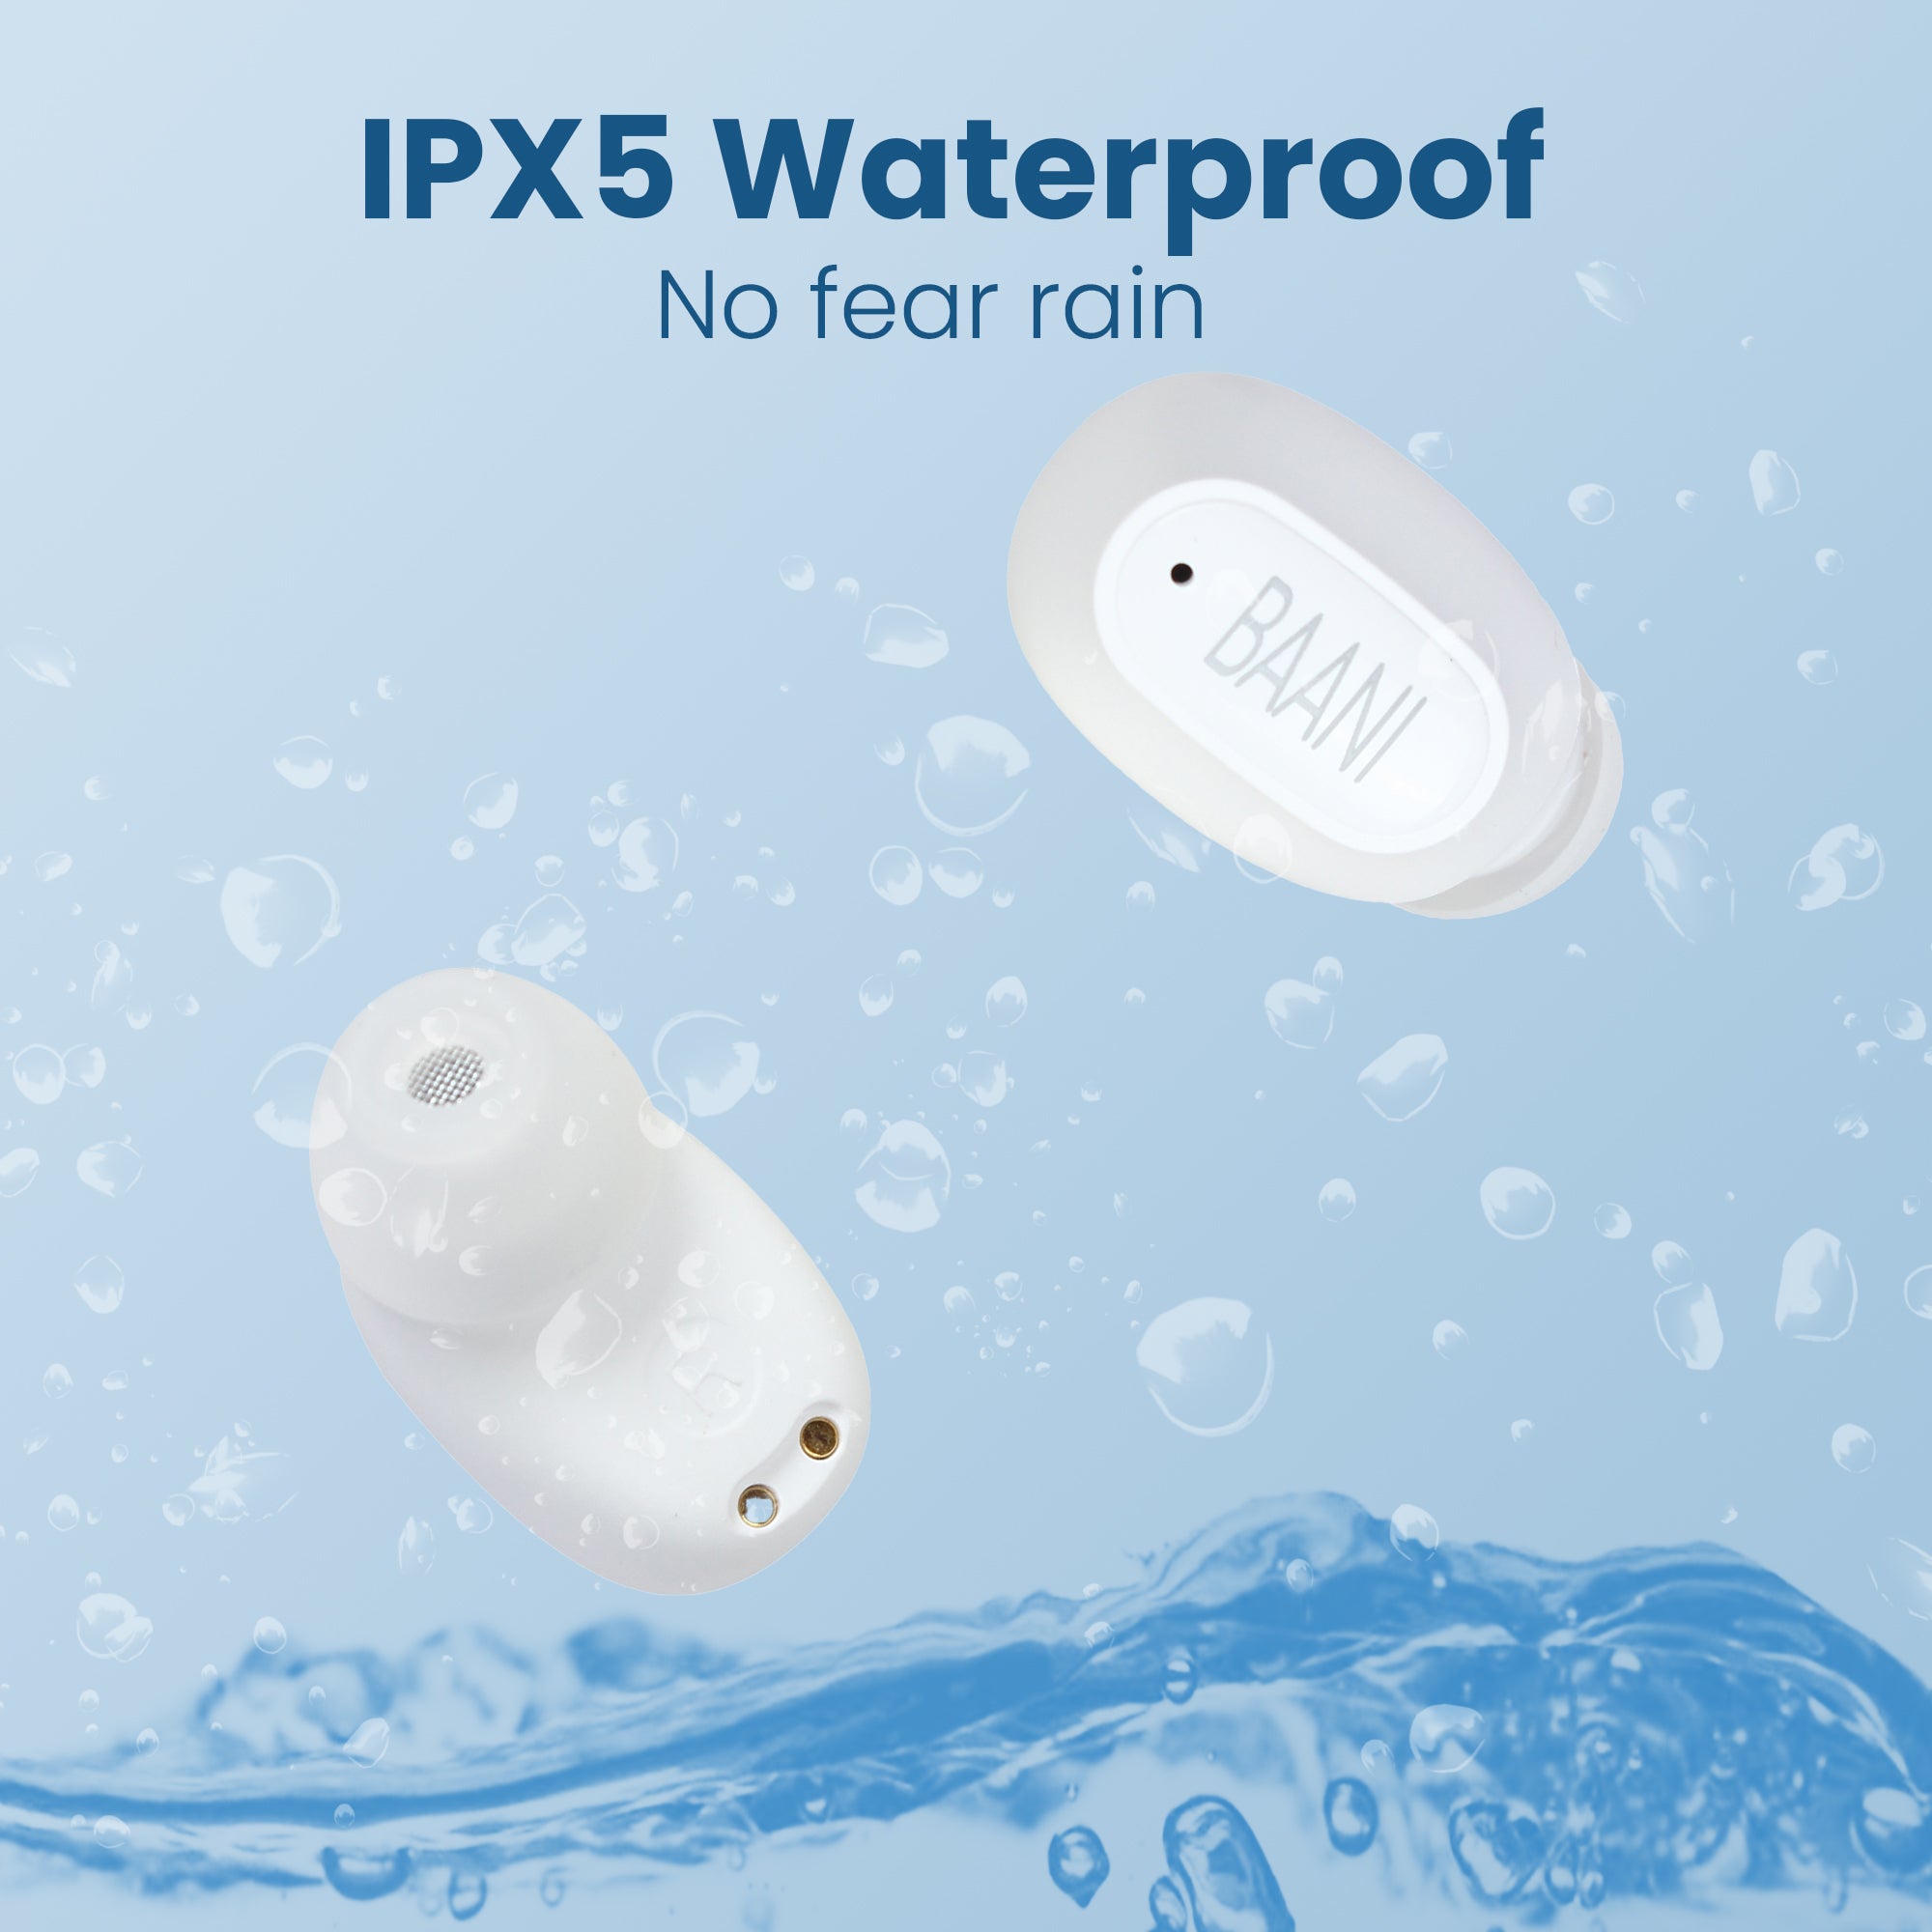 waterproof feature of white coloured BT 104 earbuds